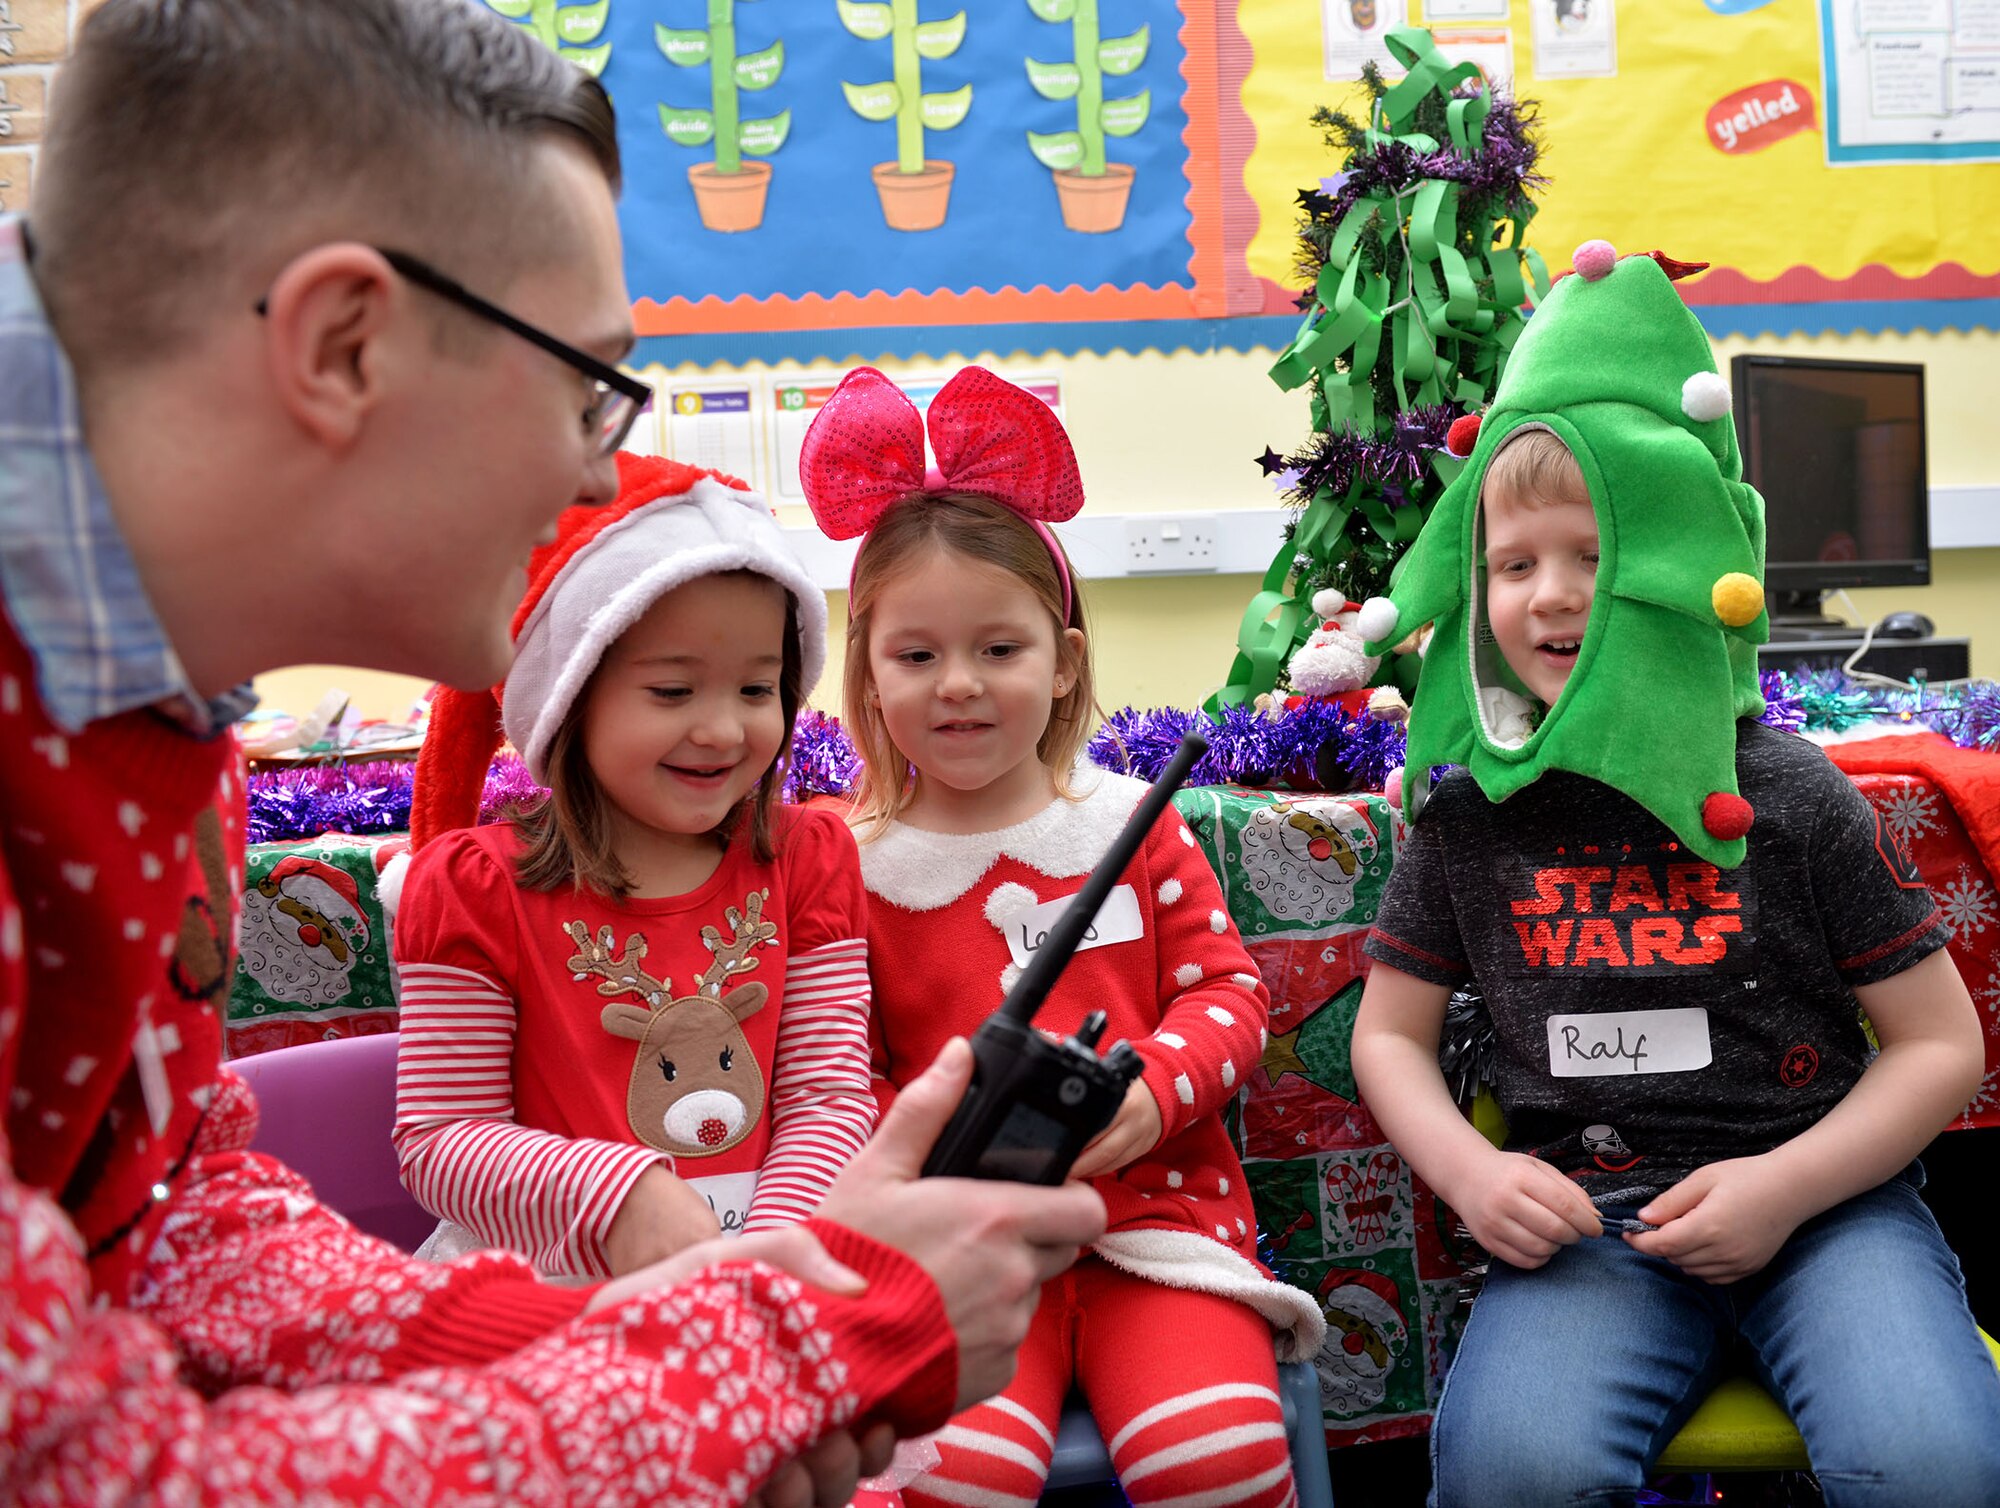 U.S. Air Force Senior Airman Roy Smith, 100th Communications Squadron radio frequency transmissions systems technician, operates a radio as children from Great Heath Academy, Mildenhall, Suffolk, talk with Santa Dec. 18, 2018. A team of three Airmen from RAF Mildenhall visited Great Heath Academy and Beck Row Primary Academy to give early years students a chance to talk to Santa about what presents they would like for Christmas. (U.S. Air Force photo by Karen Abeyasekere)